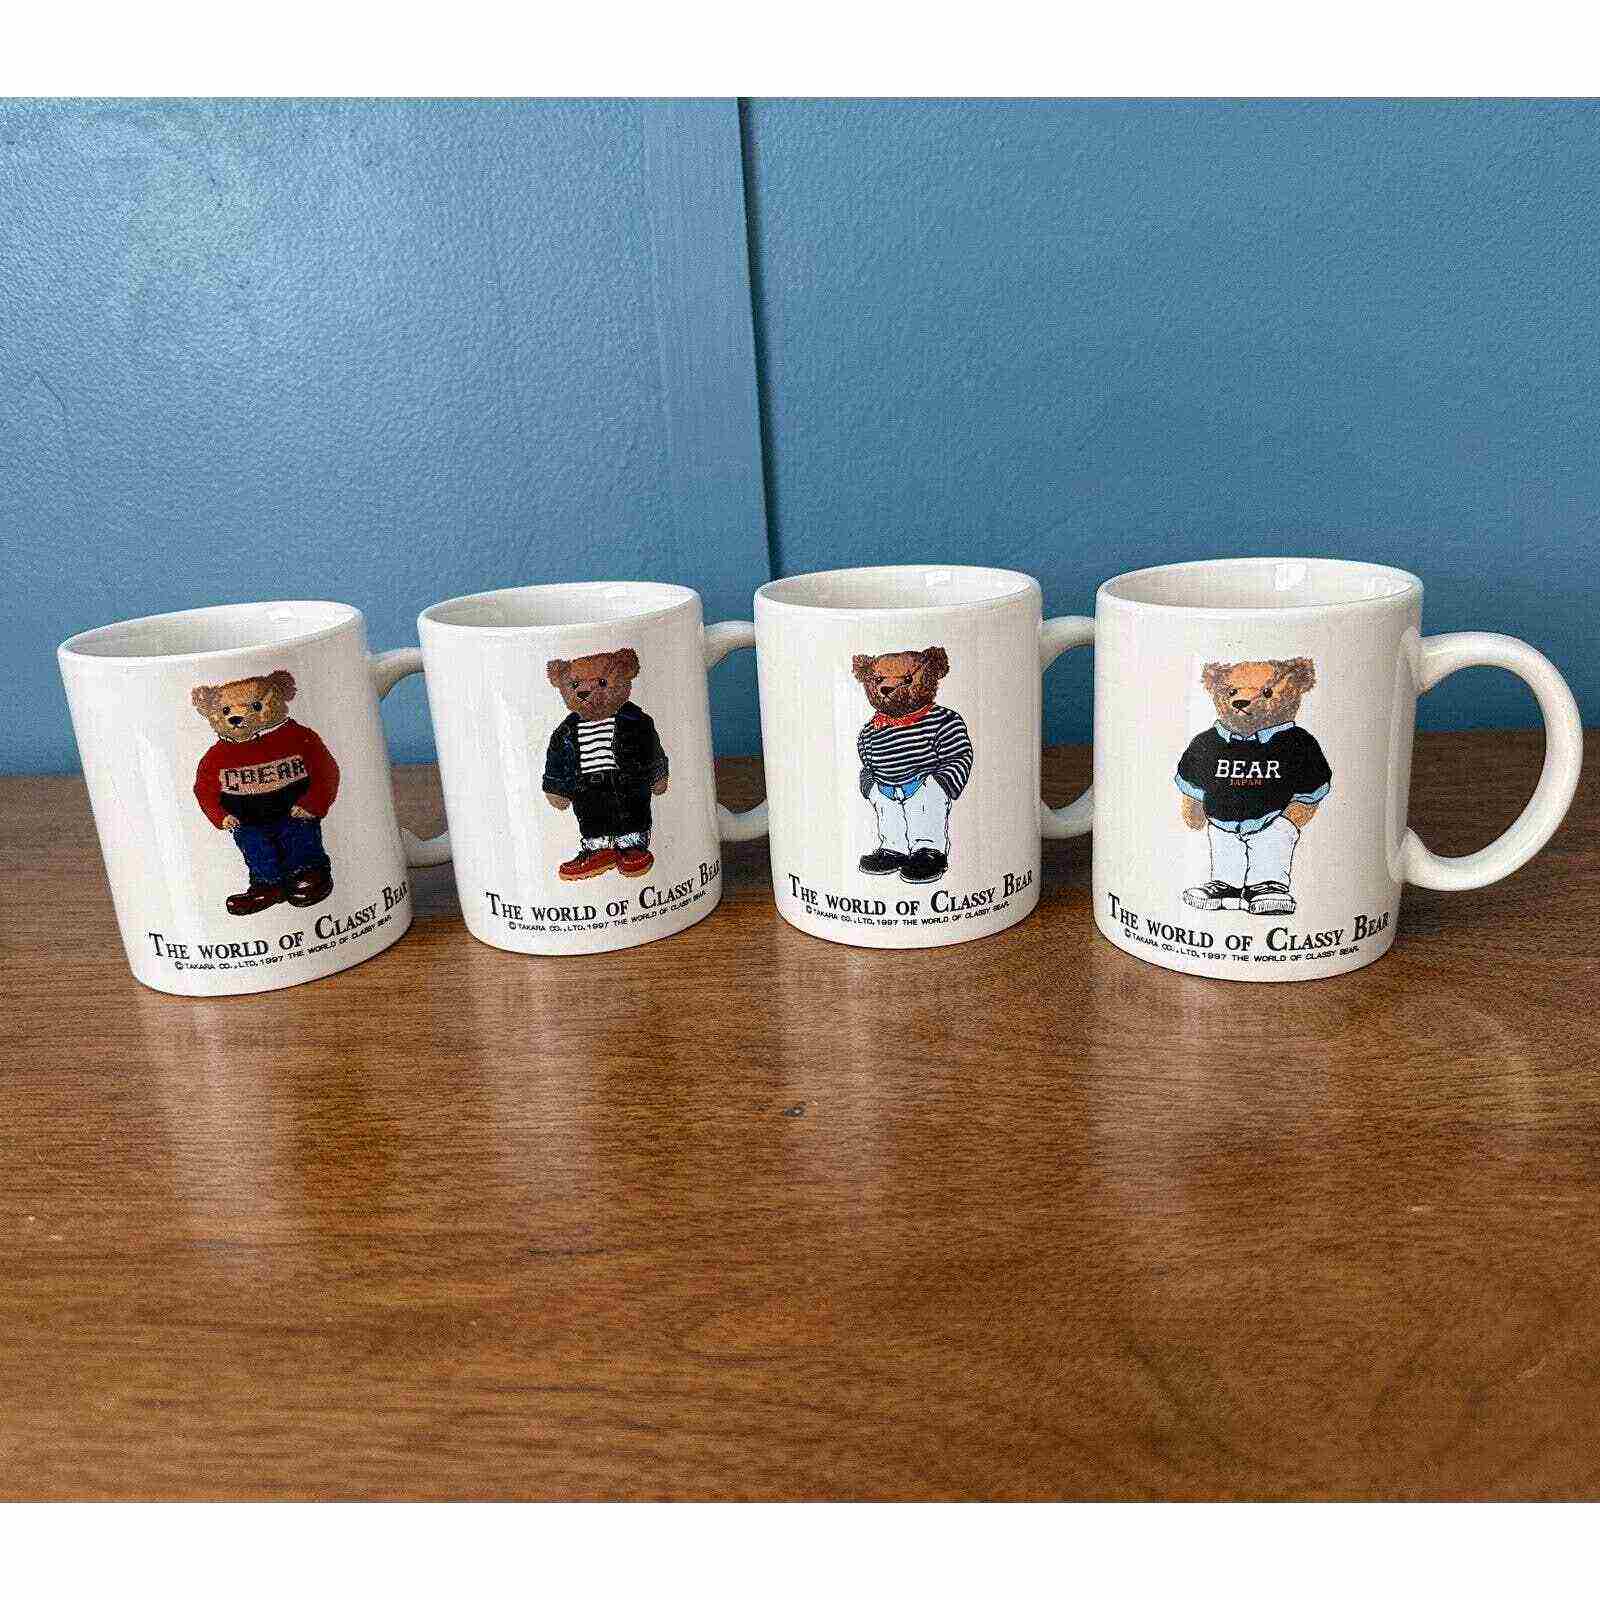 A set of four mugs with Classy Bear wearing different preppy outfits